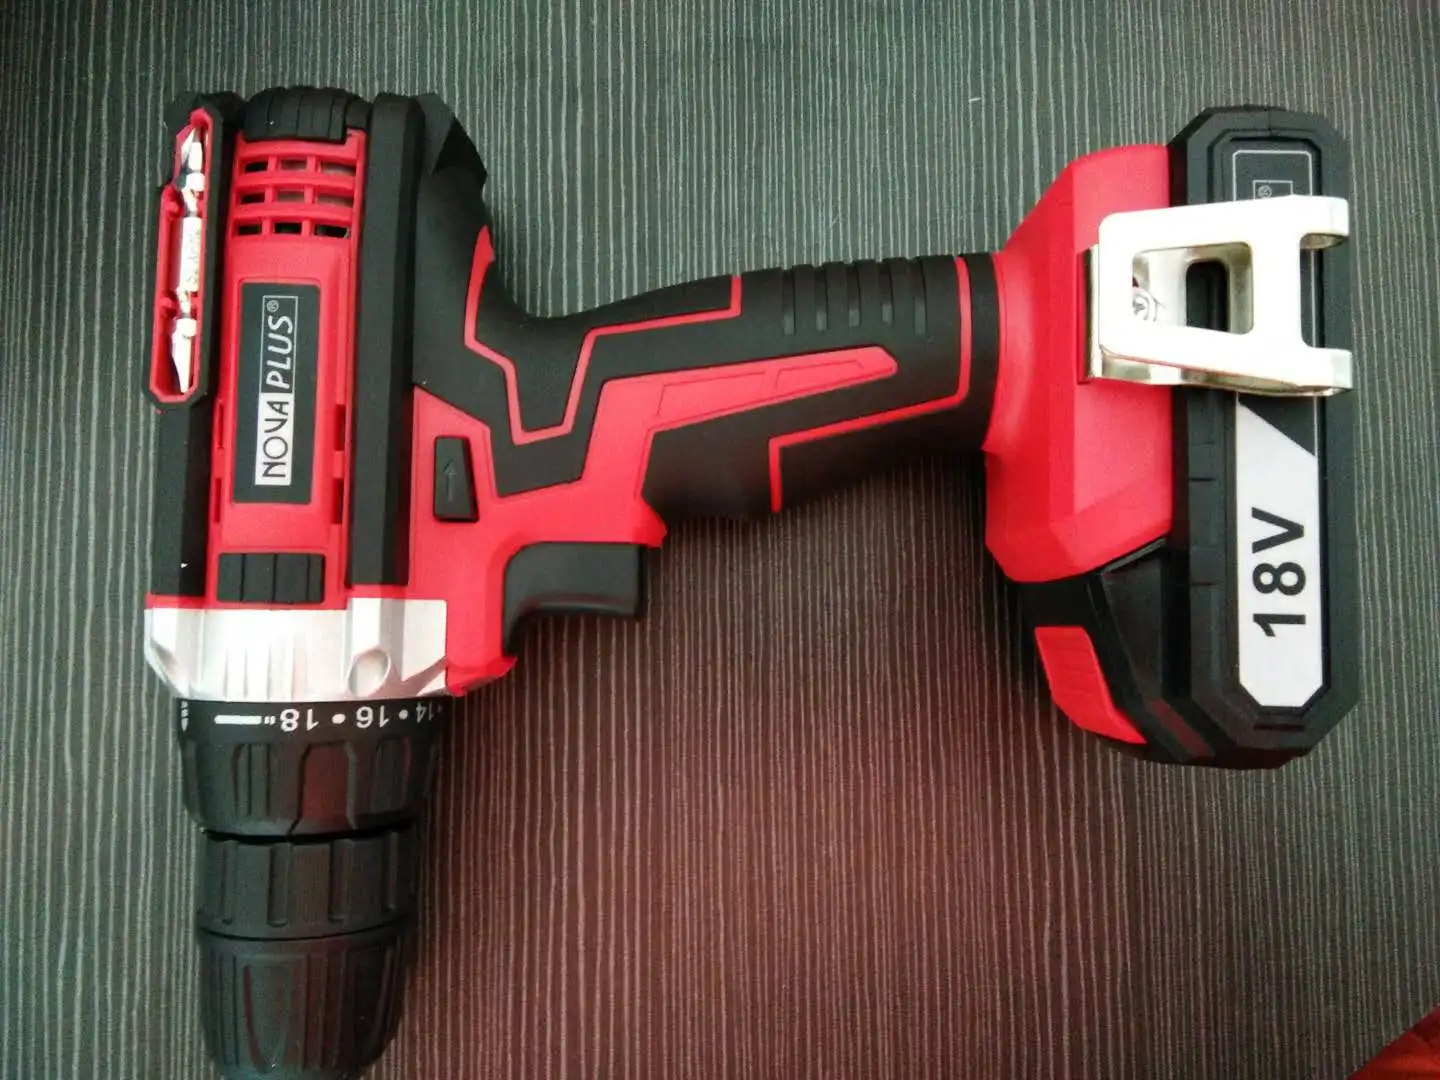 AL Lithium 18V/20V High power cordless chicago electric power tools parkside power tools spares